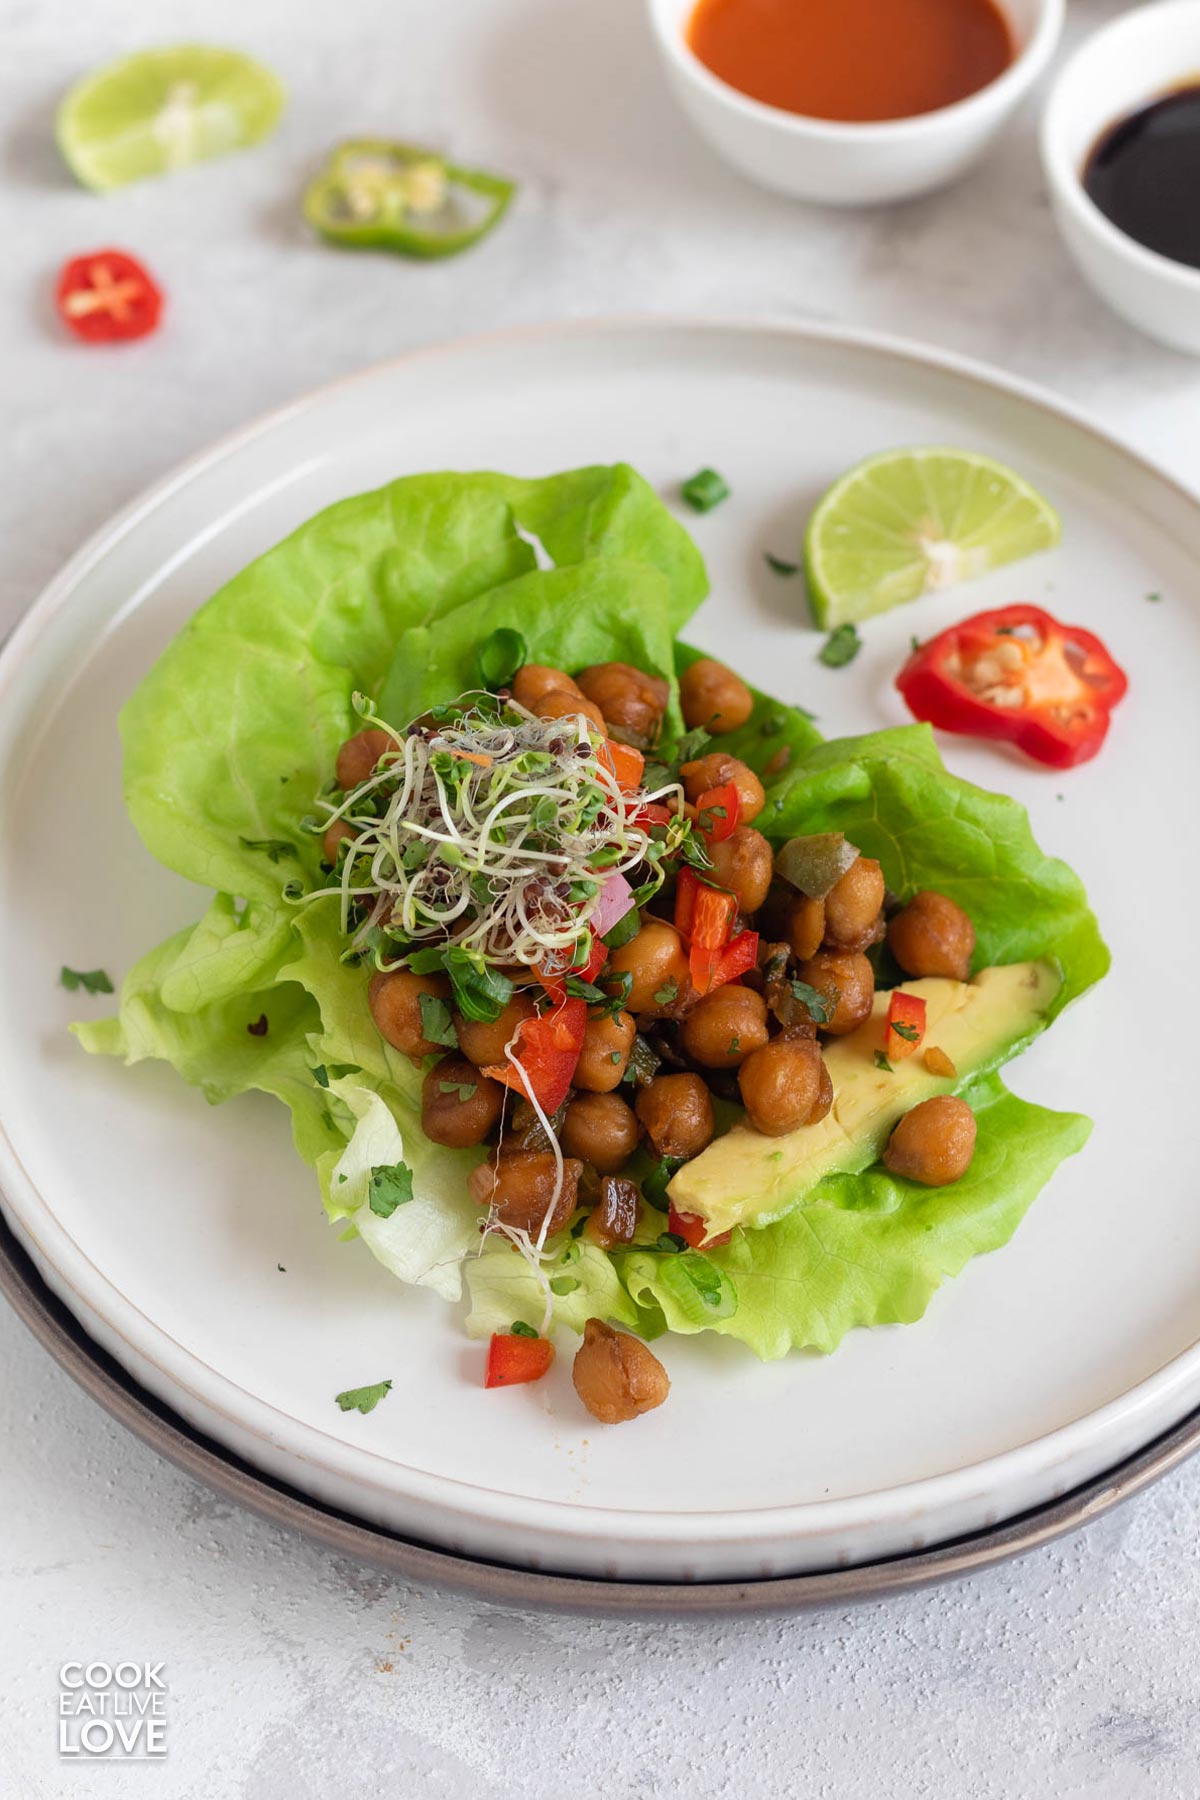 On a white rectangle two lettuce leafs are filled with buffalo chickpeas and ready to eat.